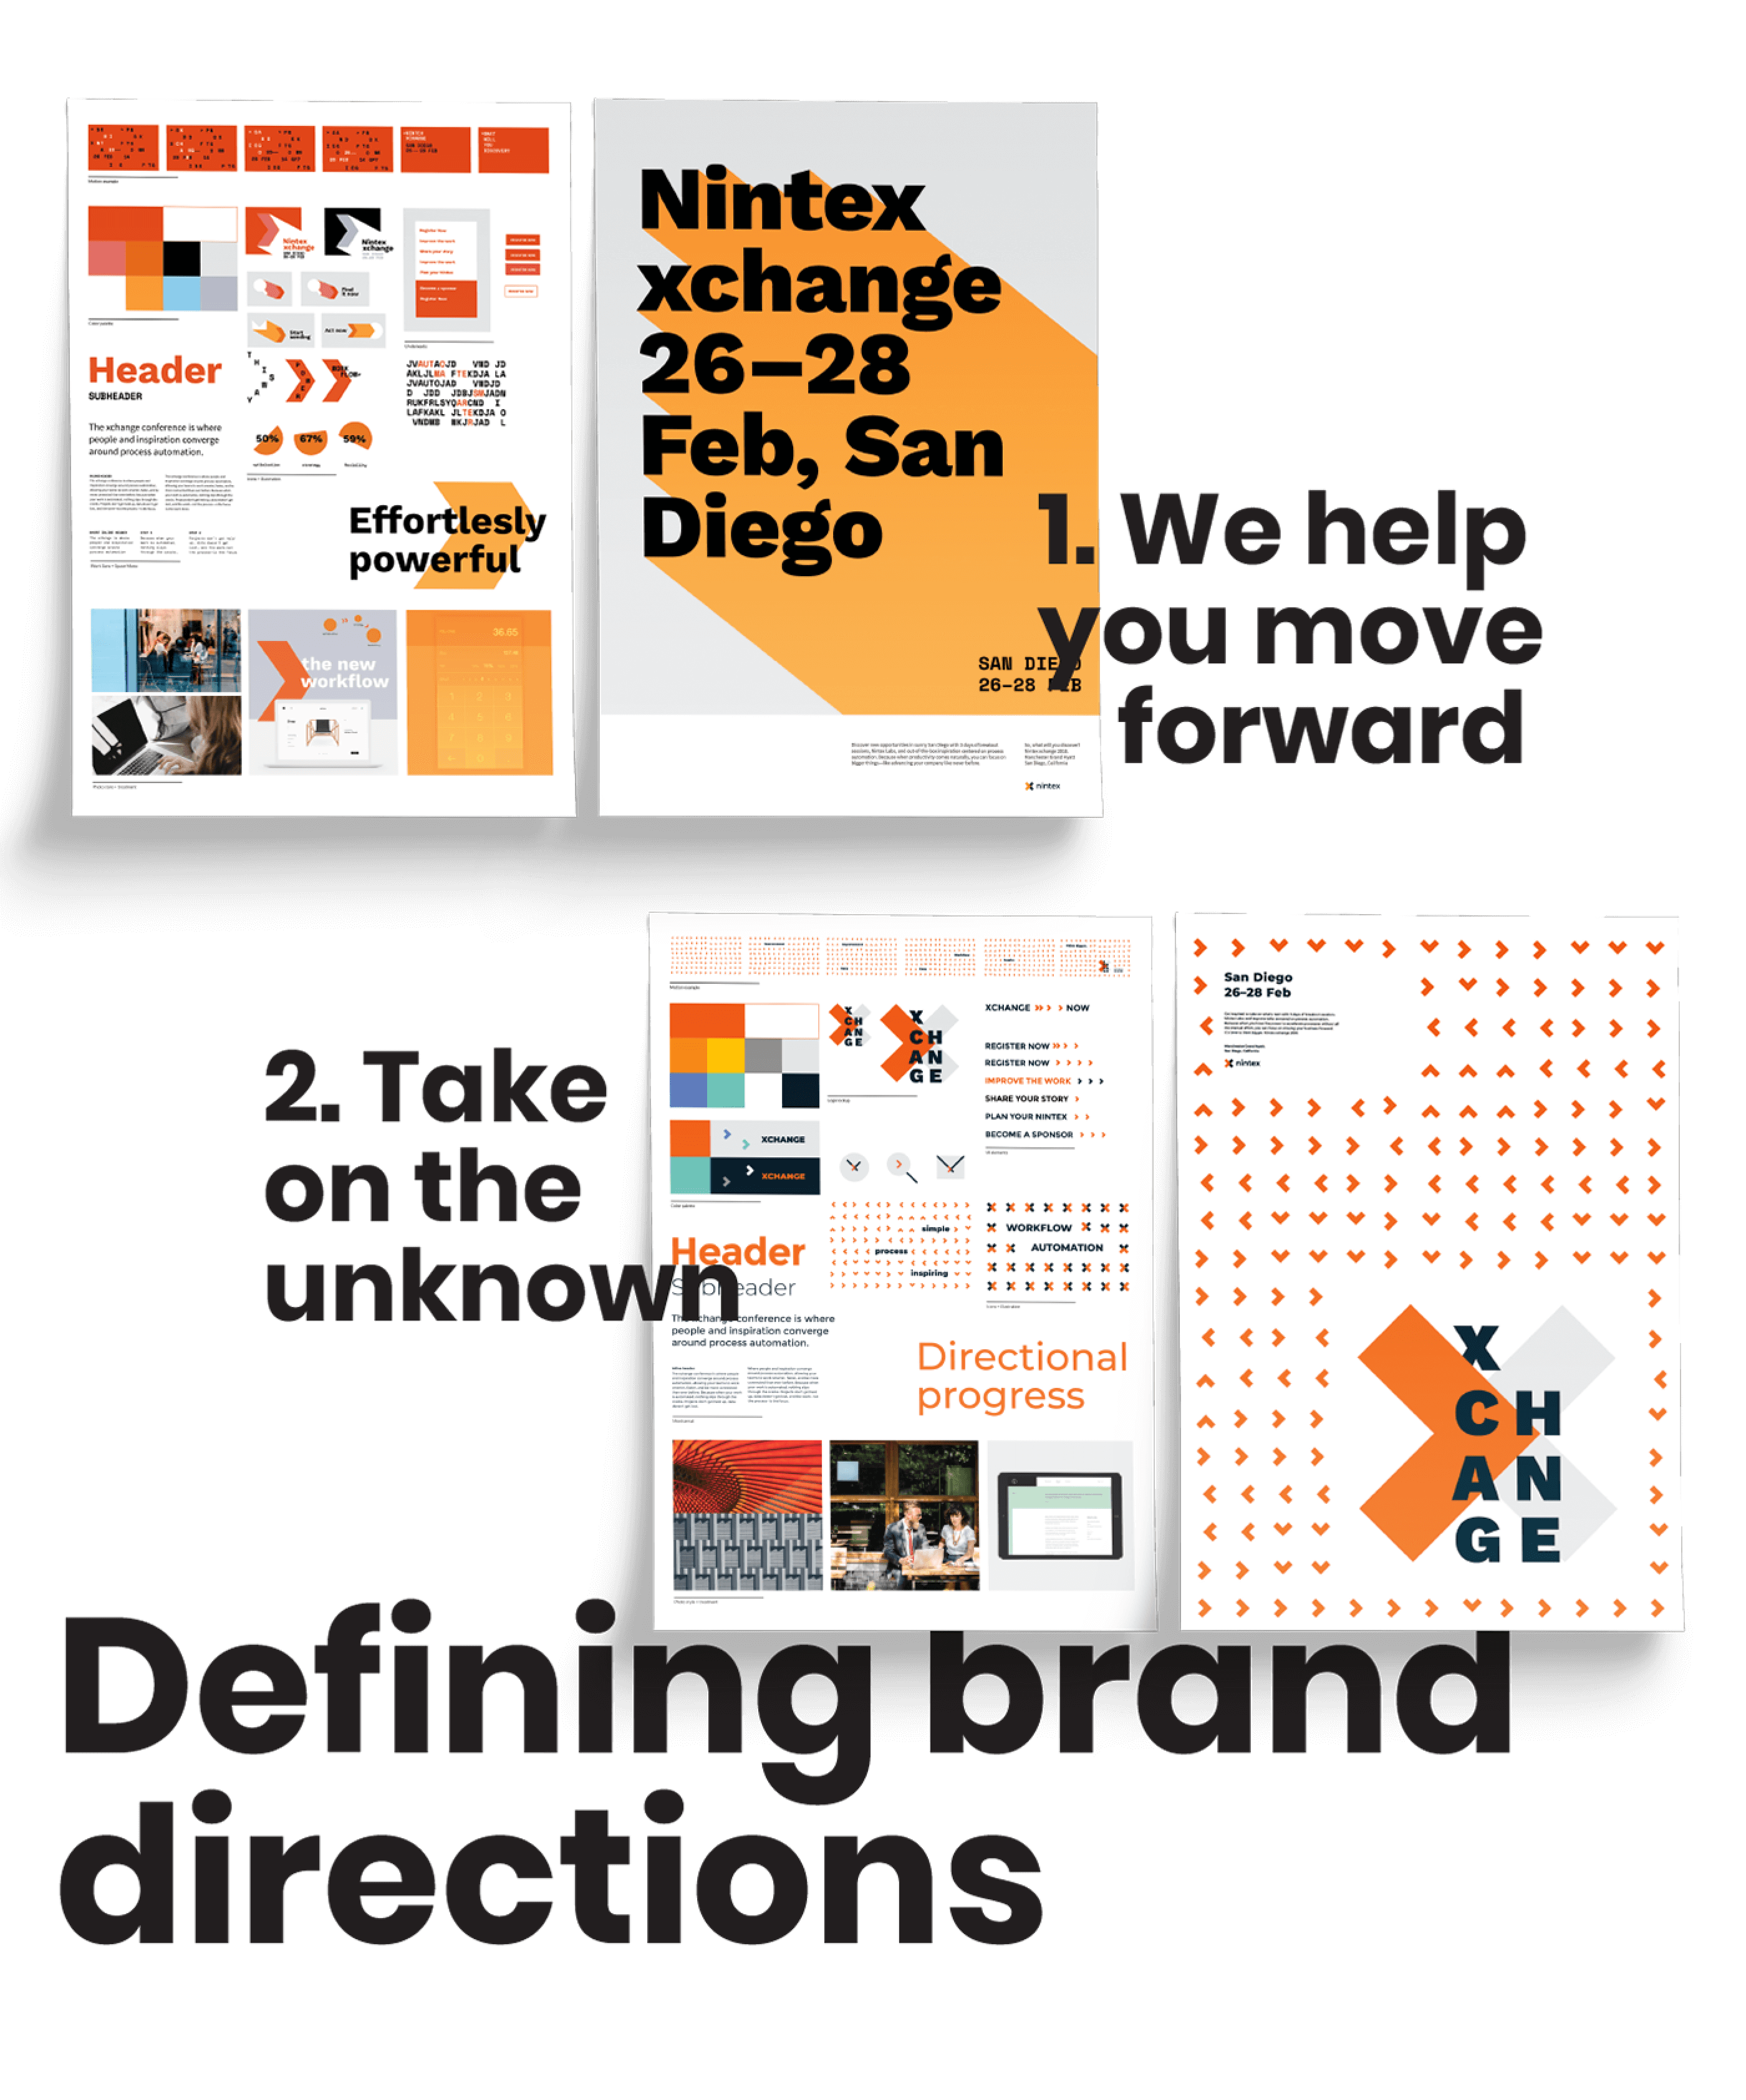 Two conference branding directions: we help you move forward with bold graphic shadows, and take on the unknown with chevron highlighting directional progress